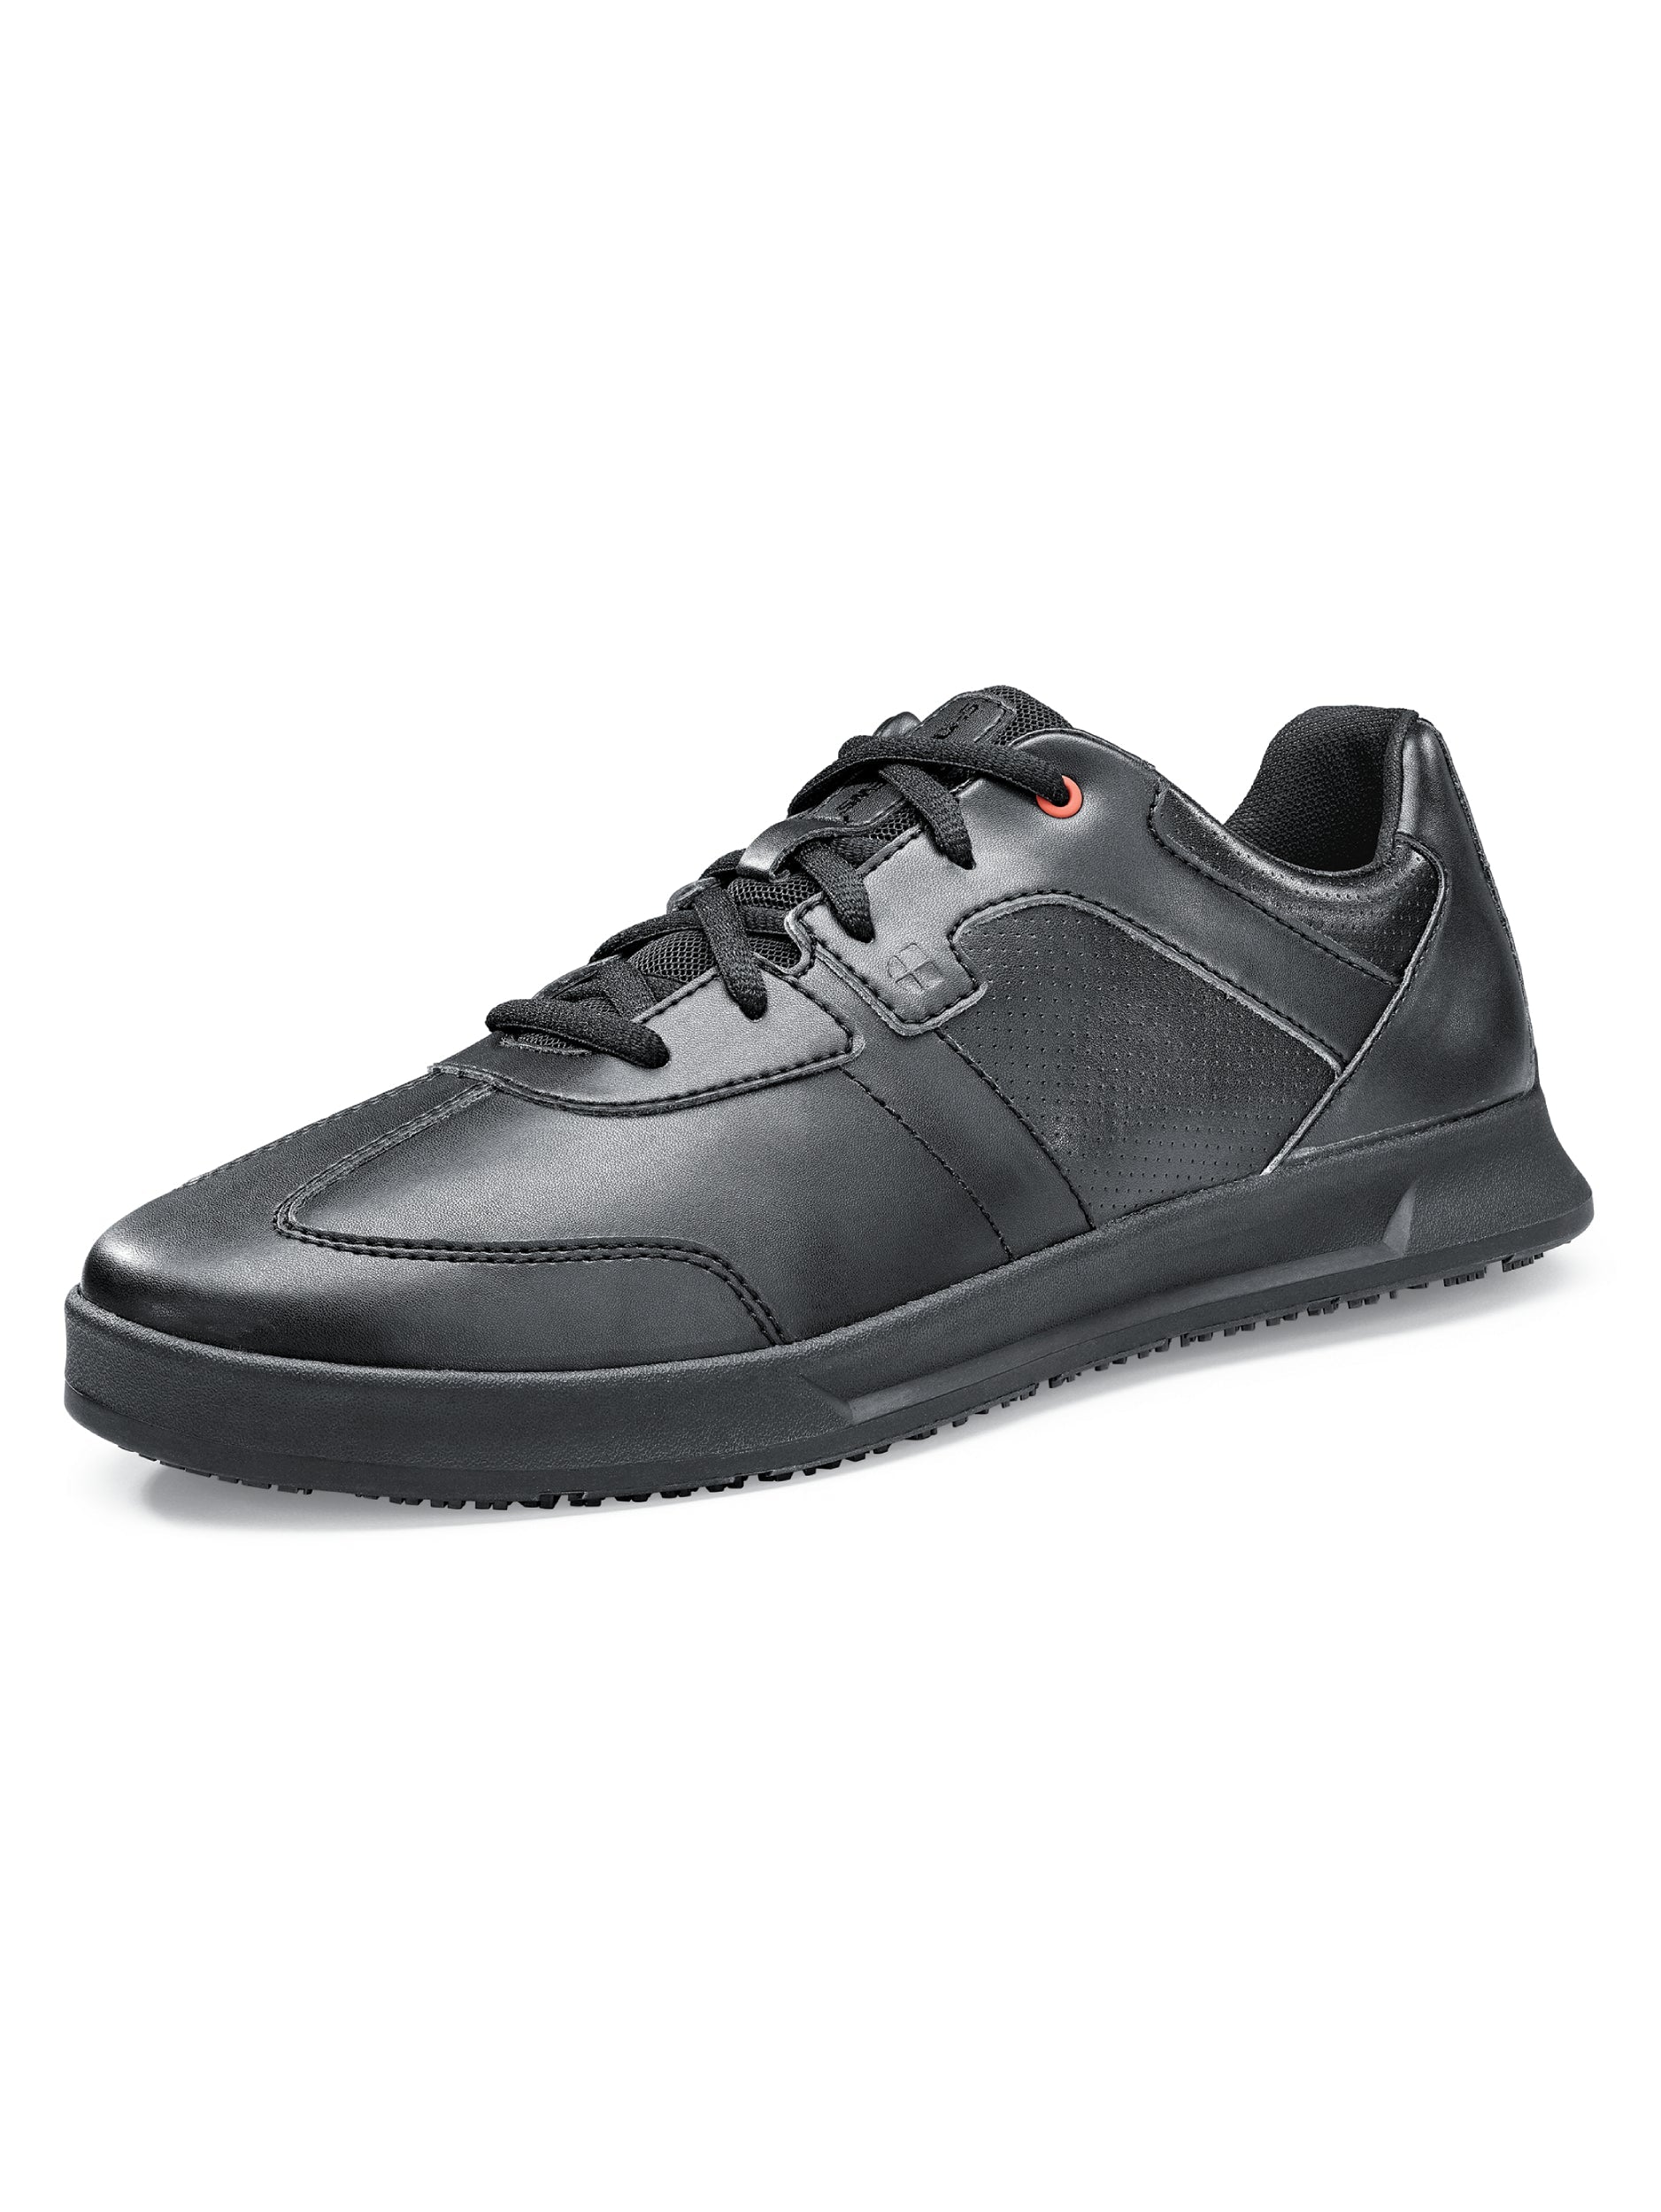 Men's Work Shoe Freestyle II Black by Shoes For Crews -  ChefsCotton